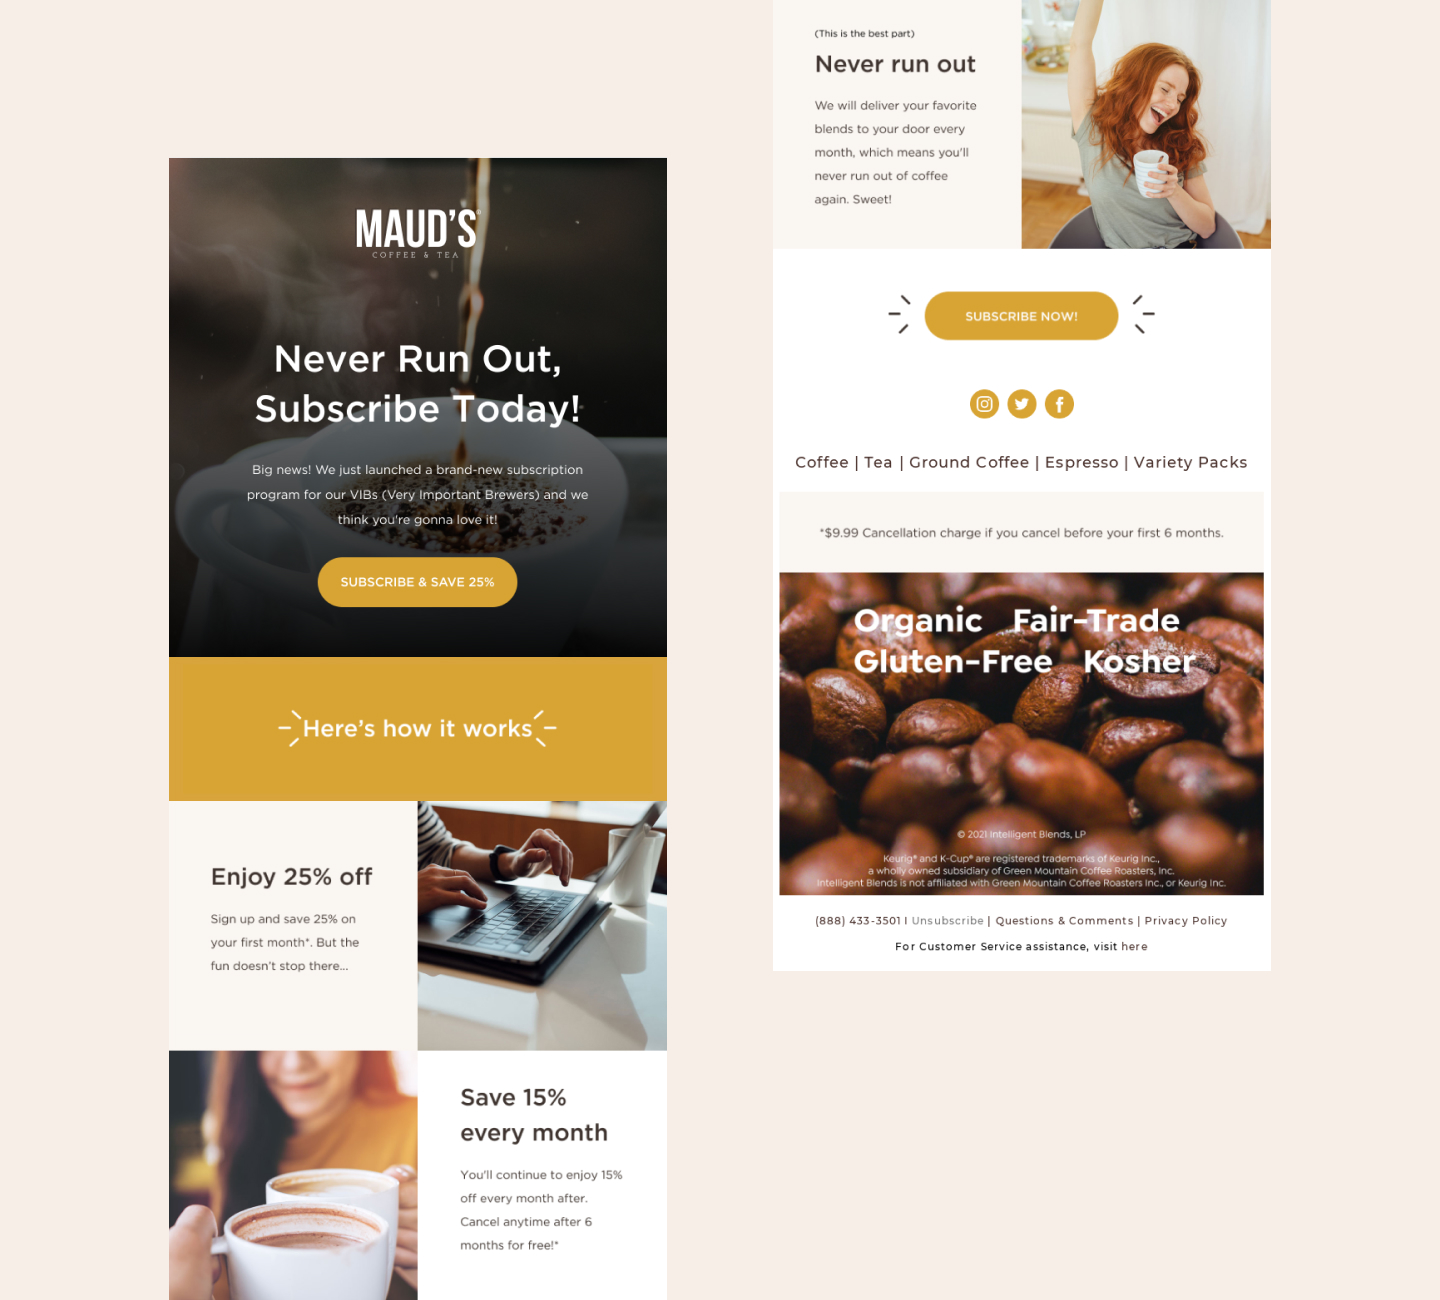 promotion of subscriptions and discounts in maud's coffee and tea